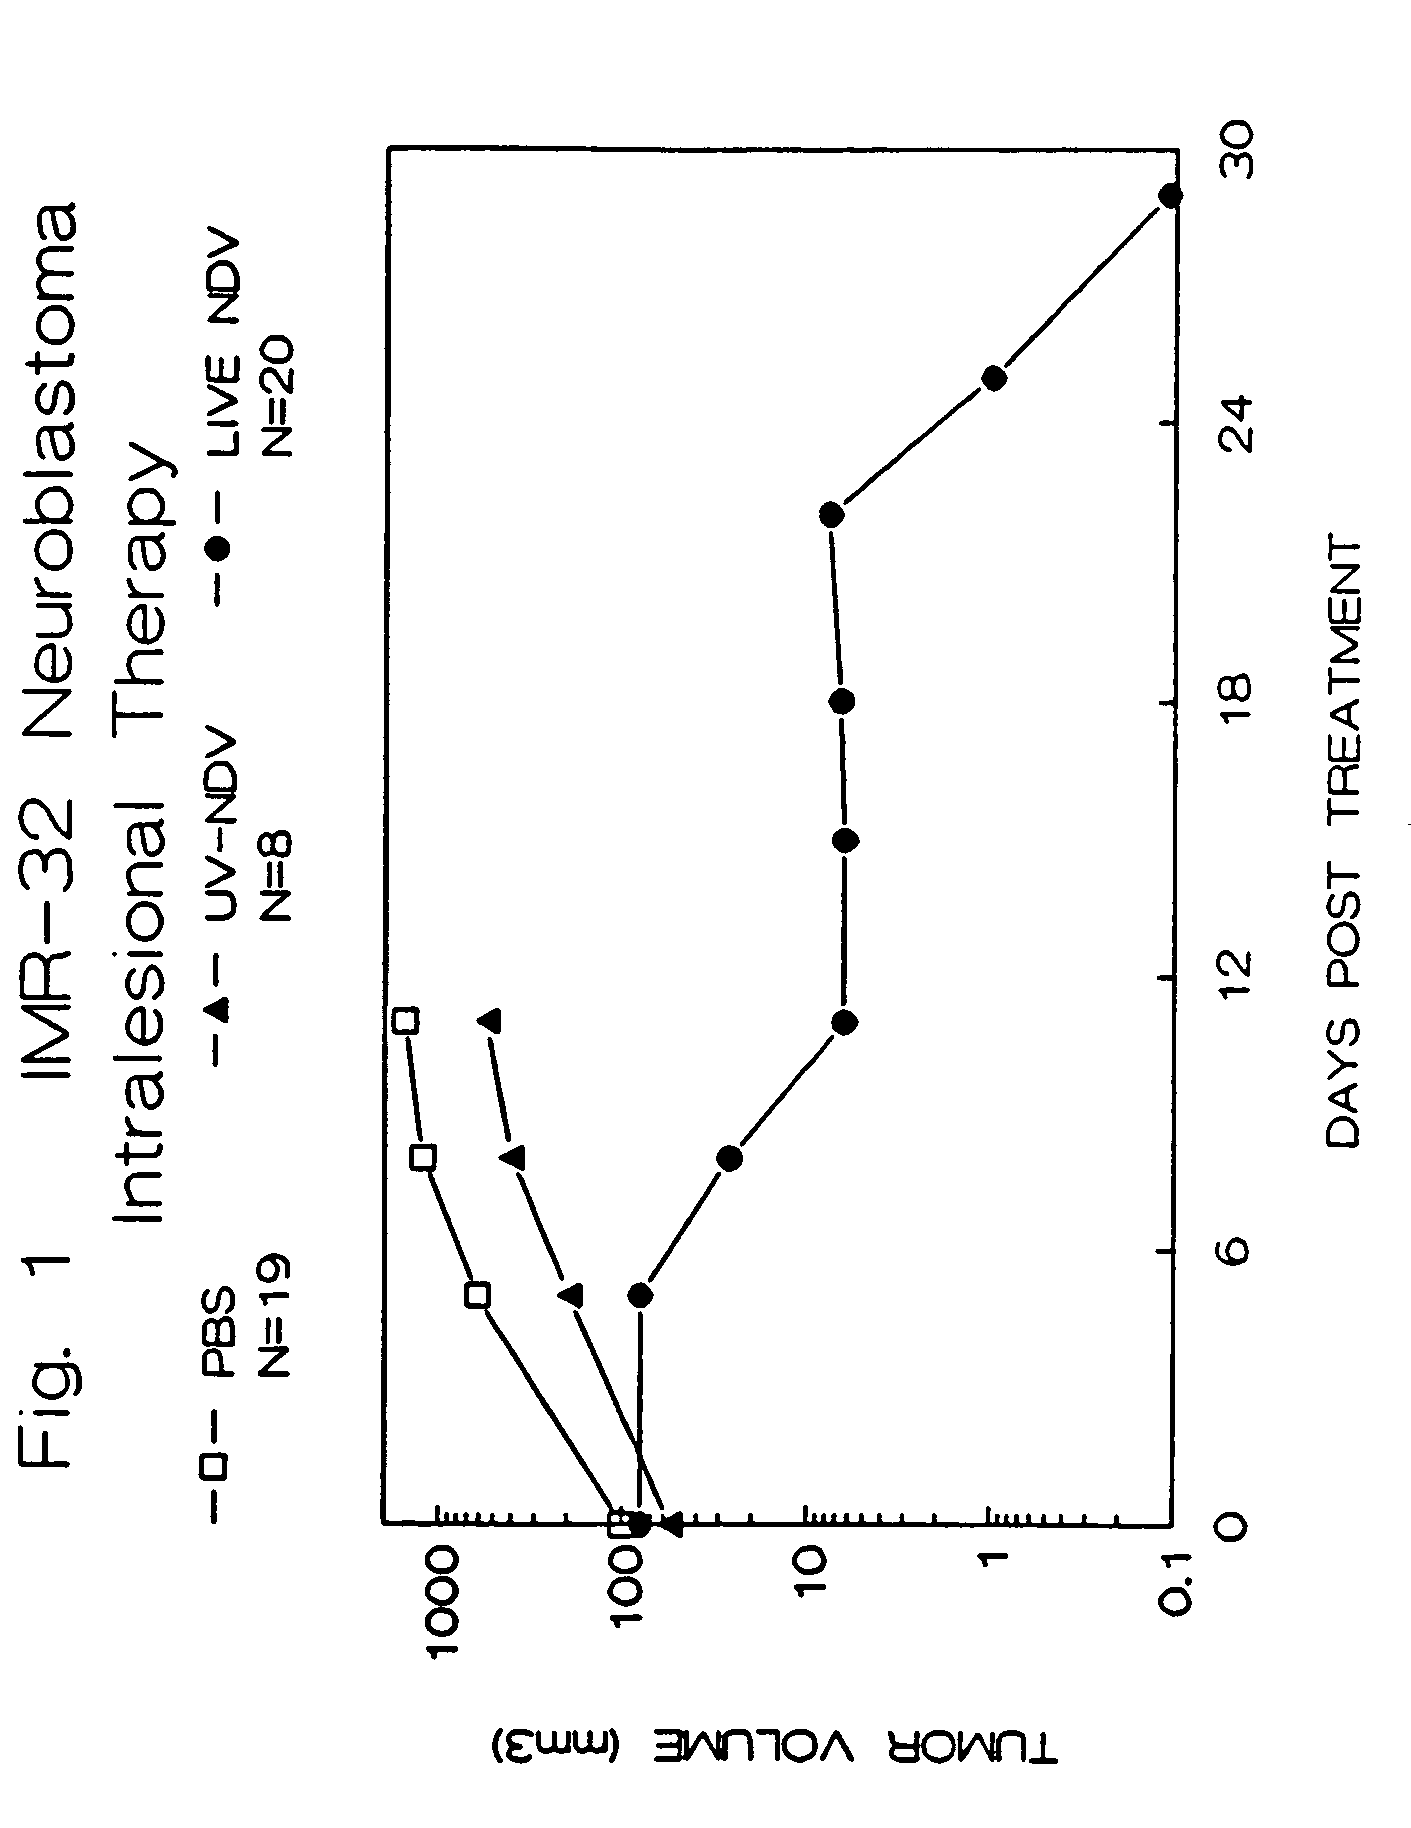 Methods of treating and detecting cancer using viruses